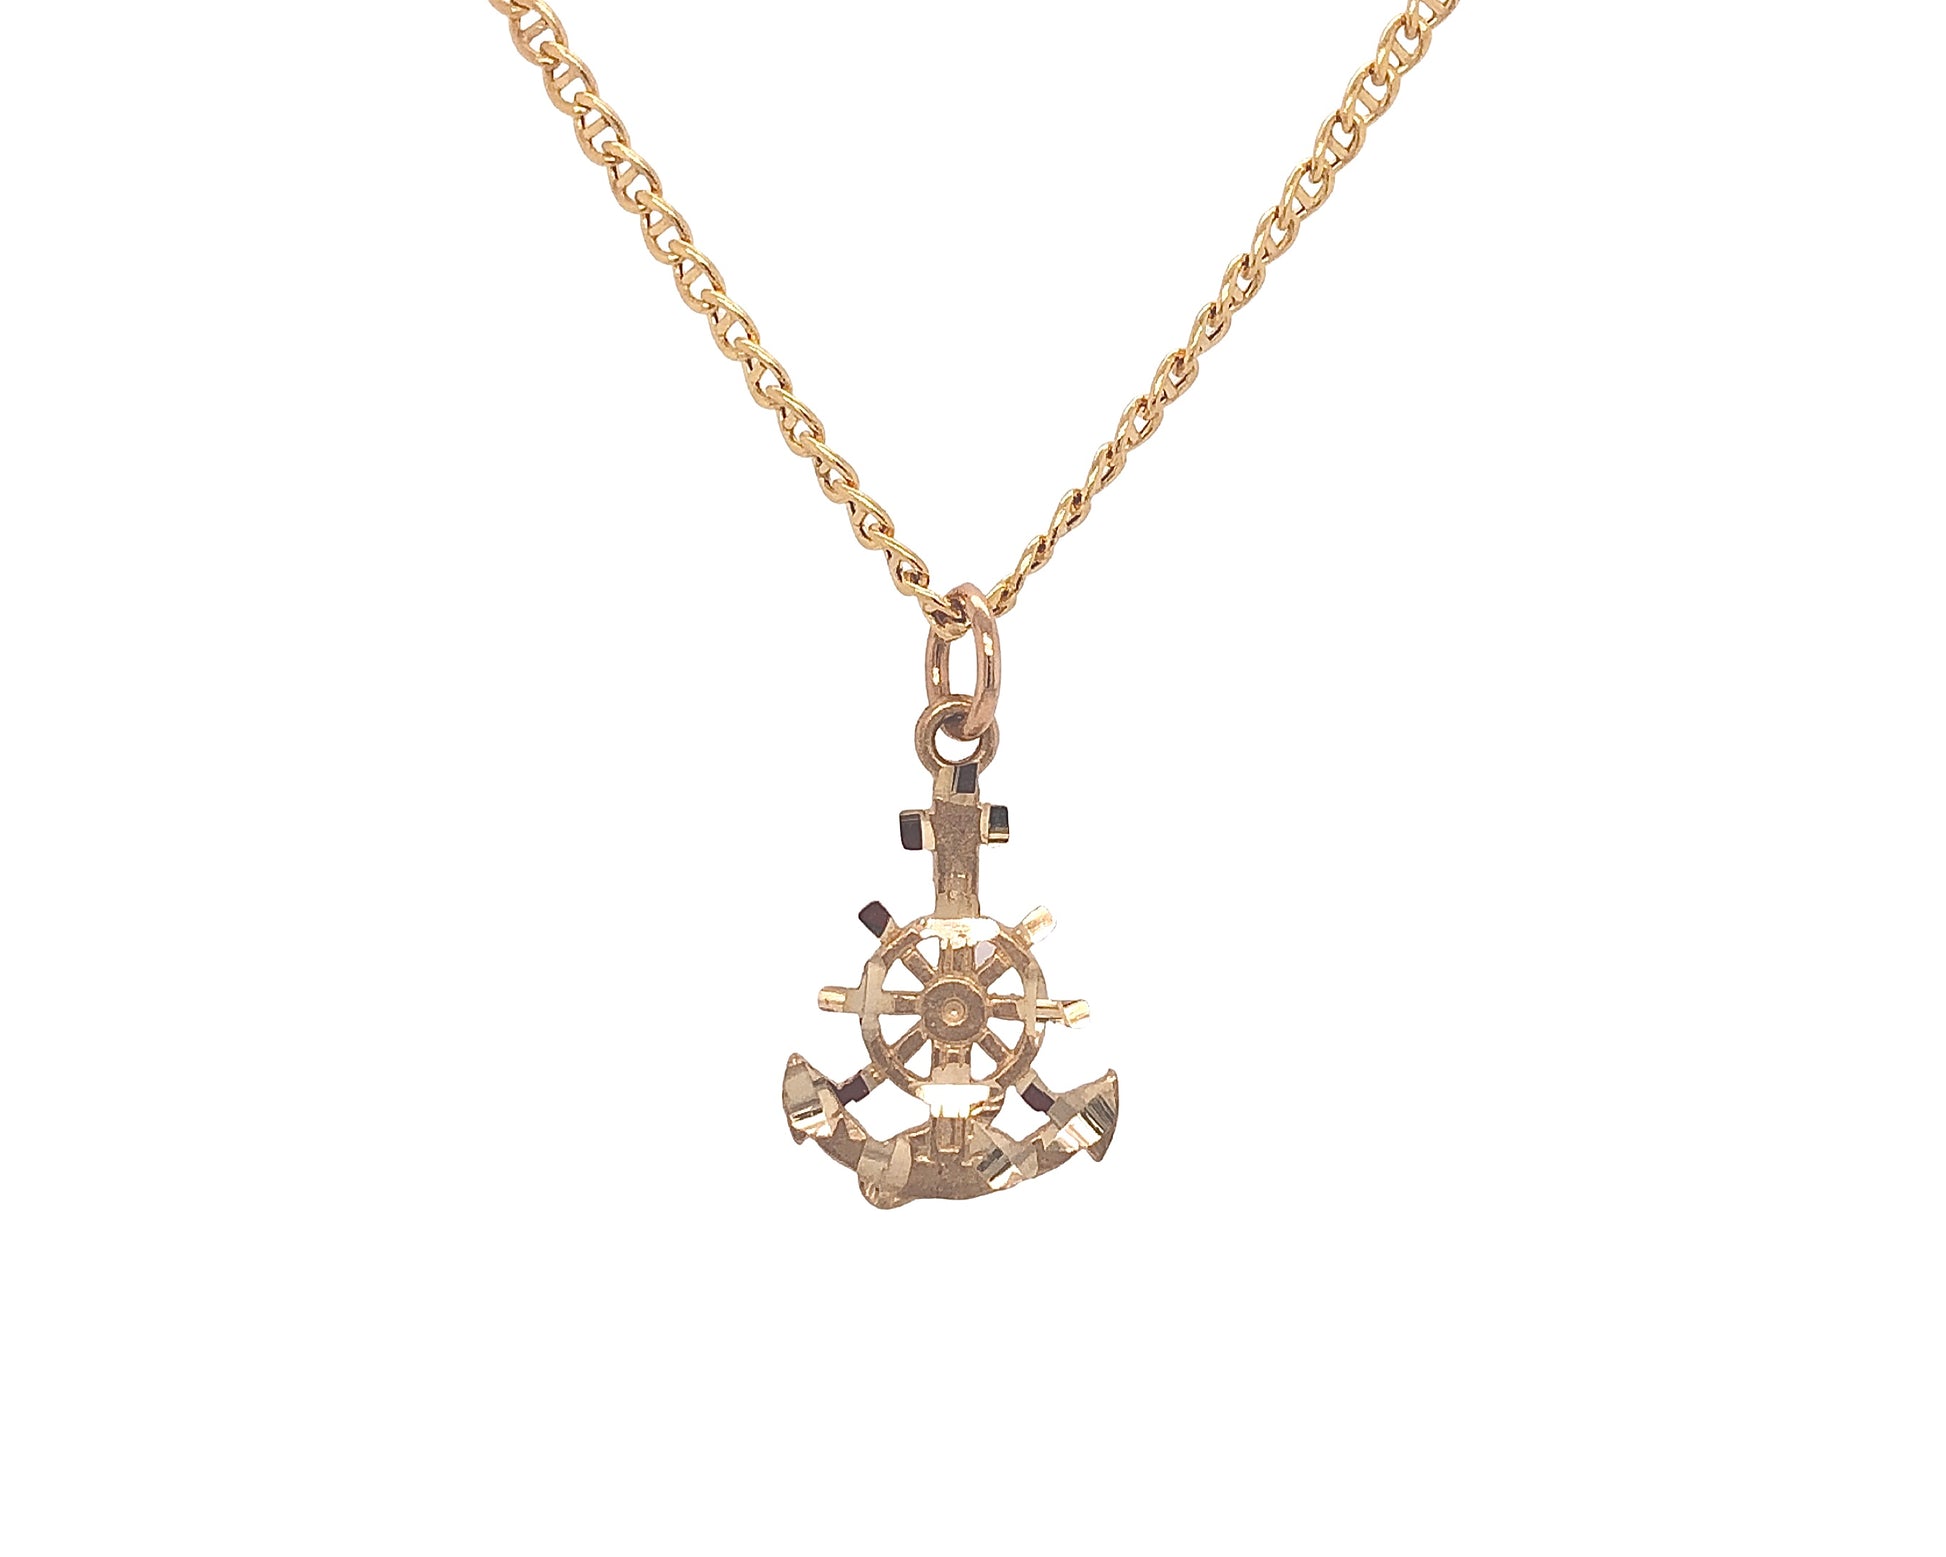 10k yellow gold anchor charm with chain 